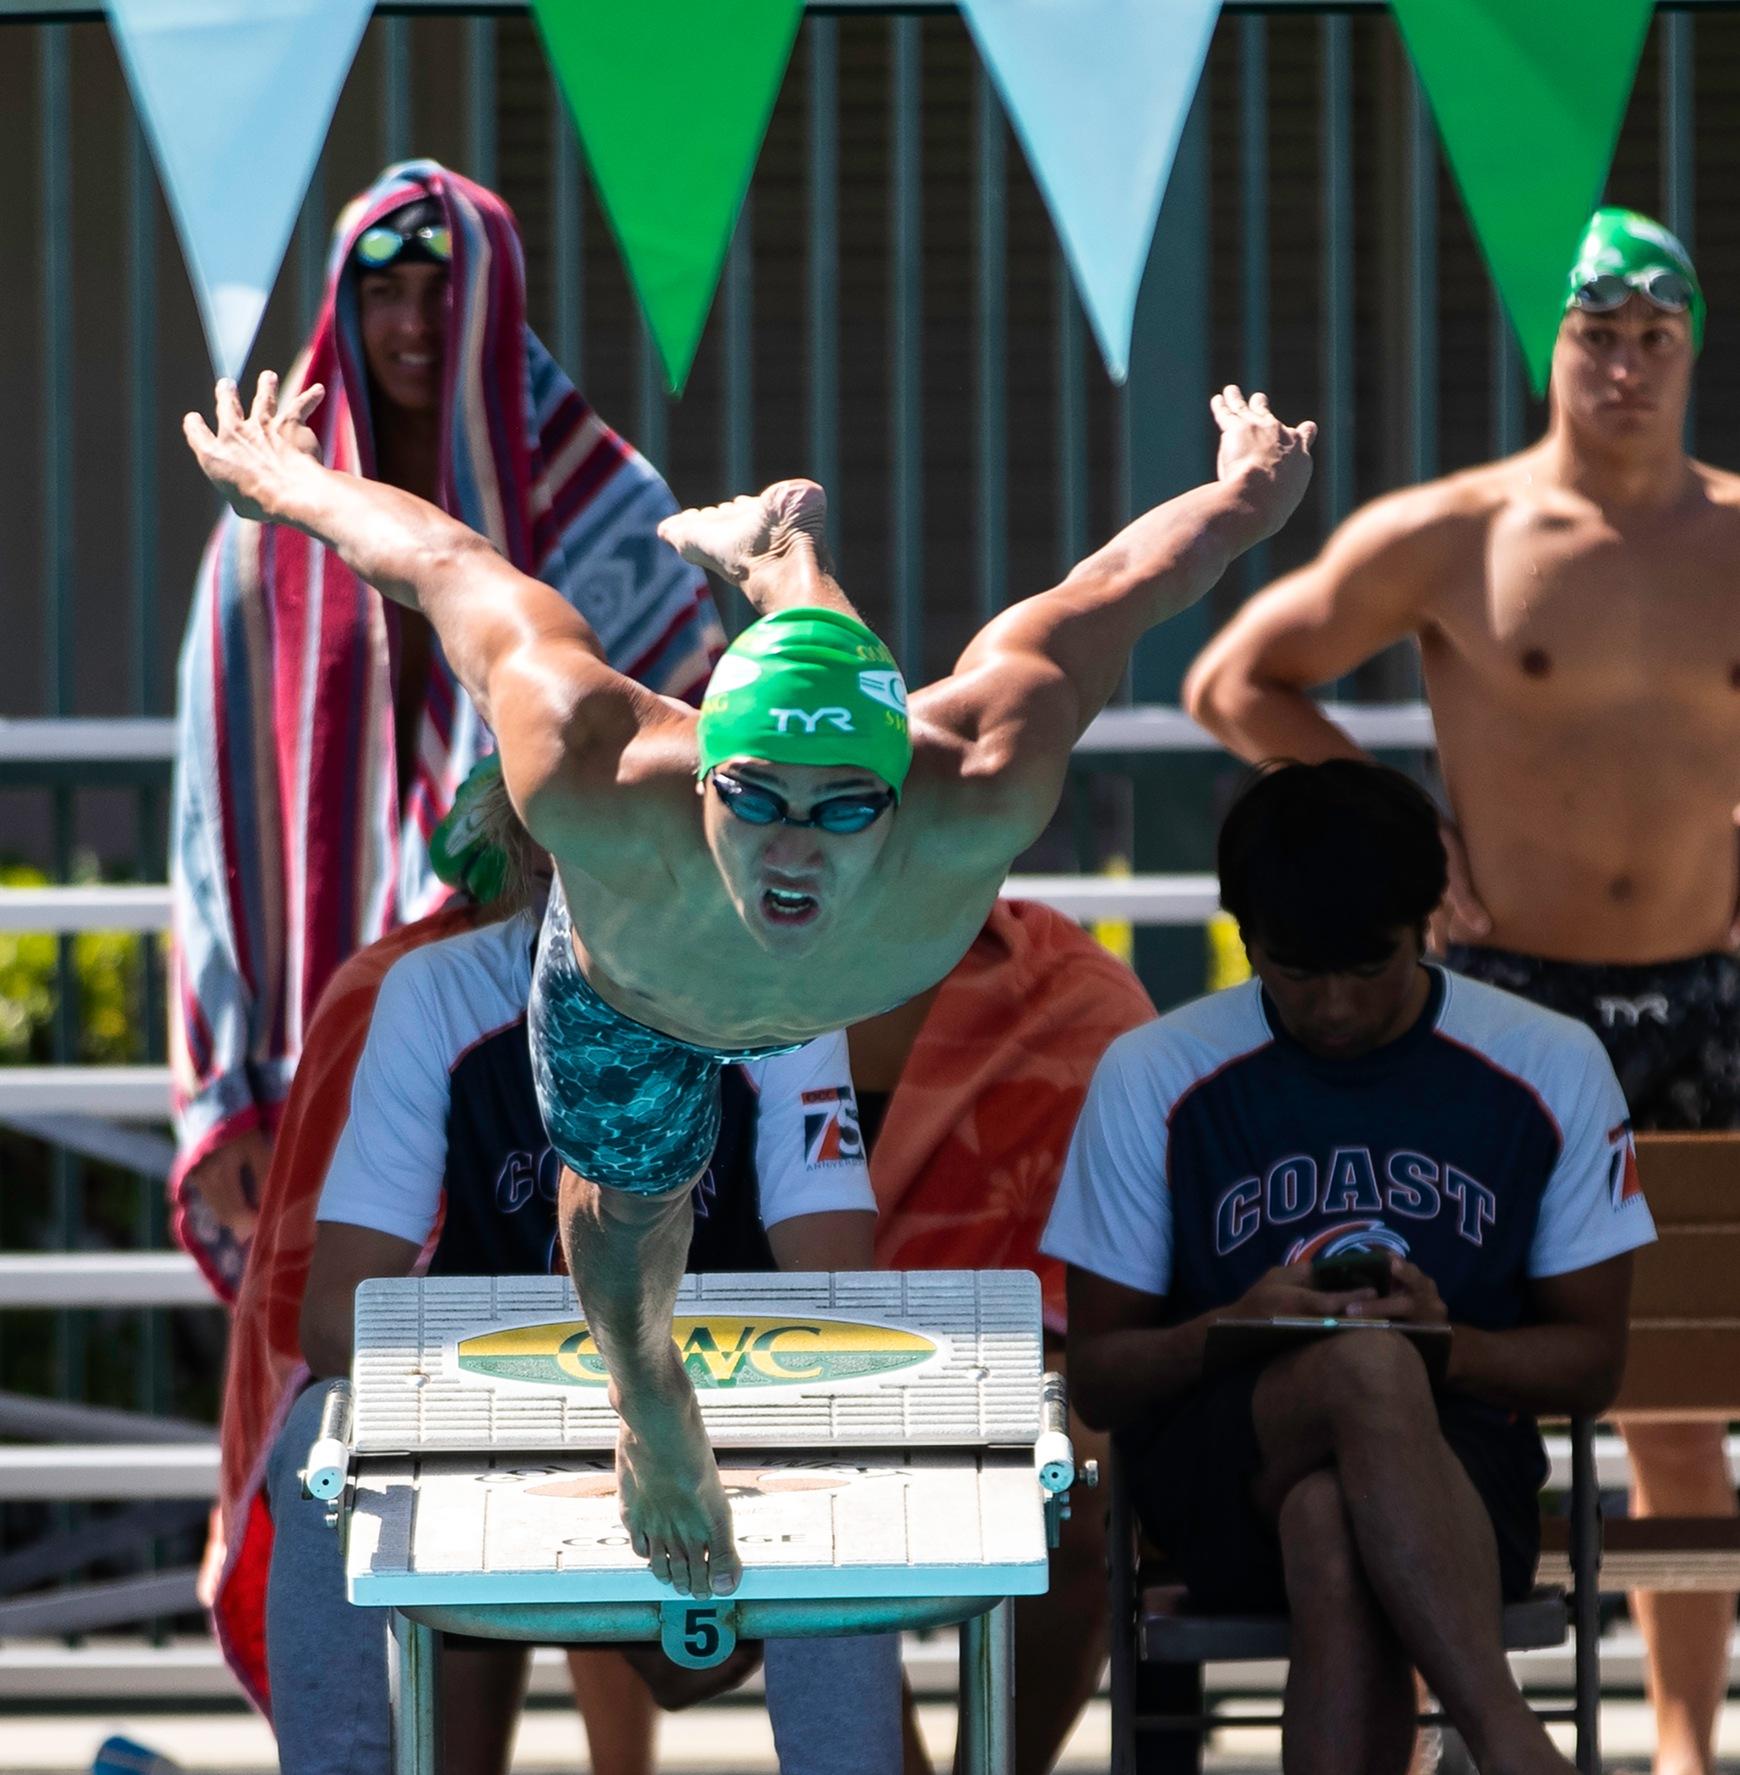 GOLDEN WEST MENS&rsquo; SWIMMING NABS EARLY SEASON INVITE TITLE